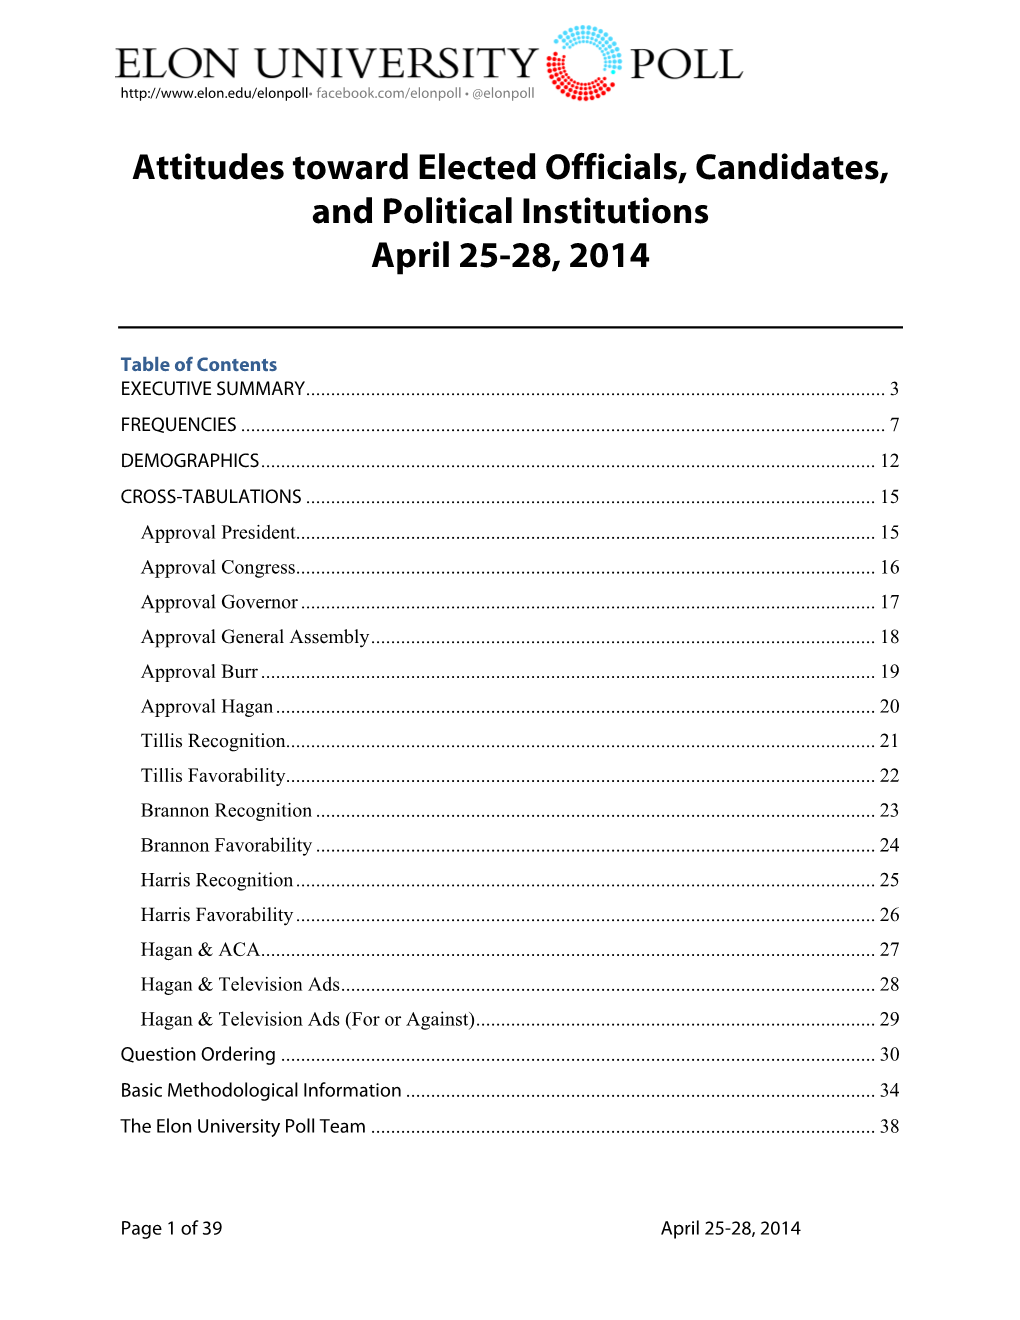 Attitudes Toward Elected Officials, Candidates, and Political Institutions April 25-28, 2014